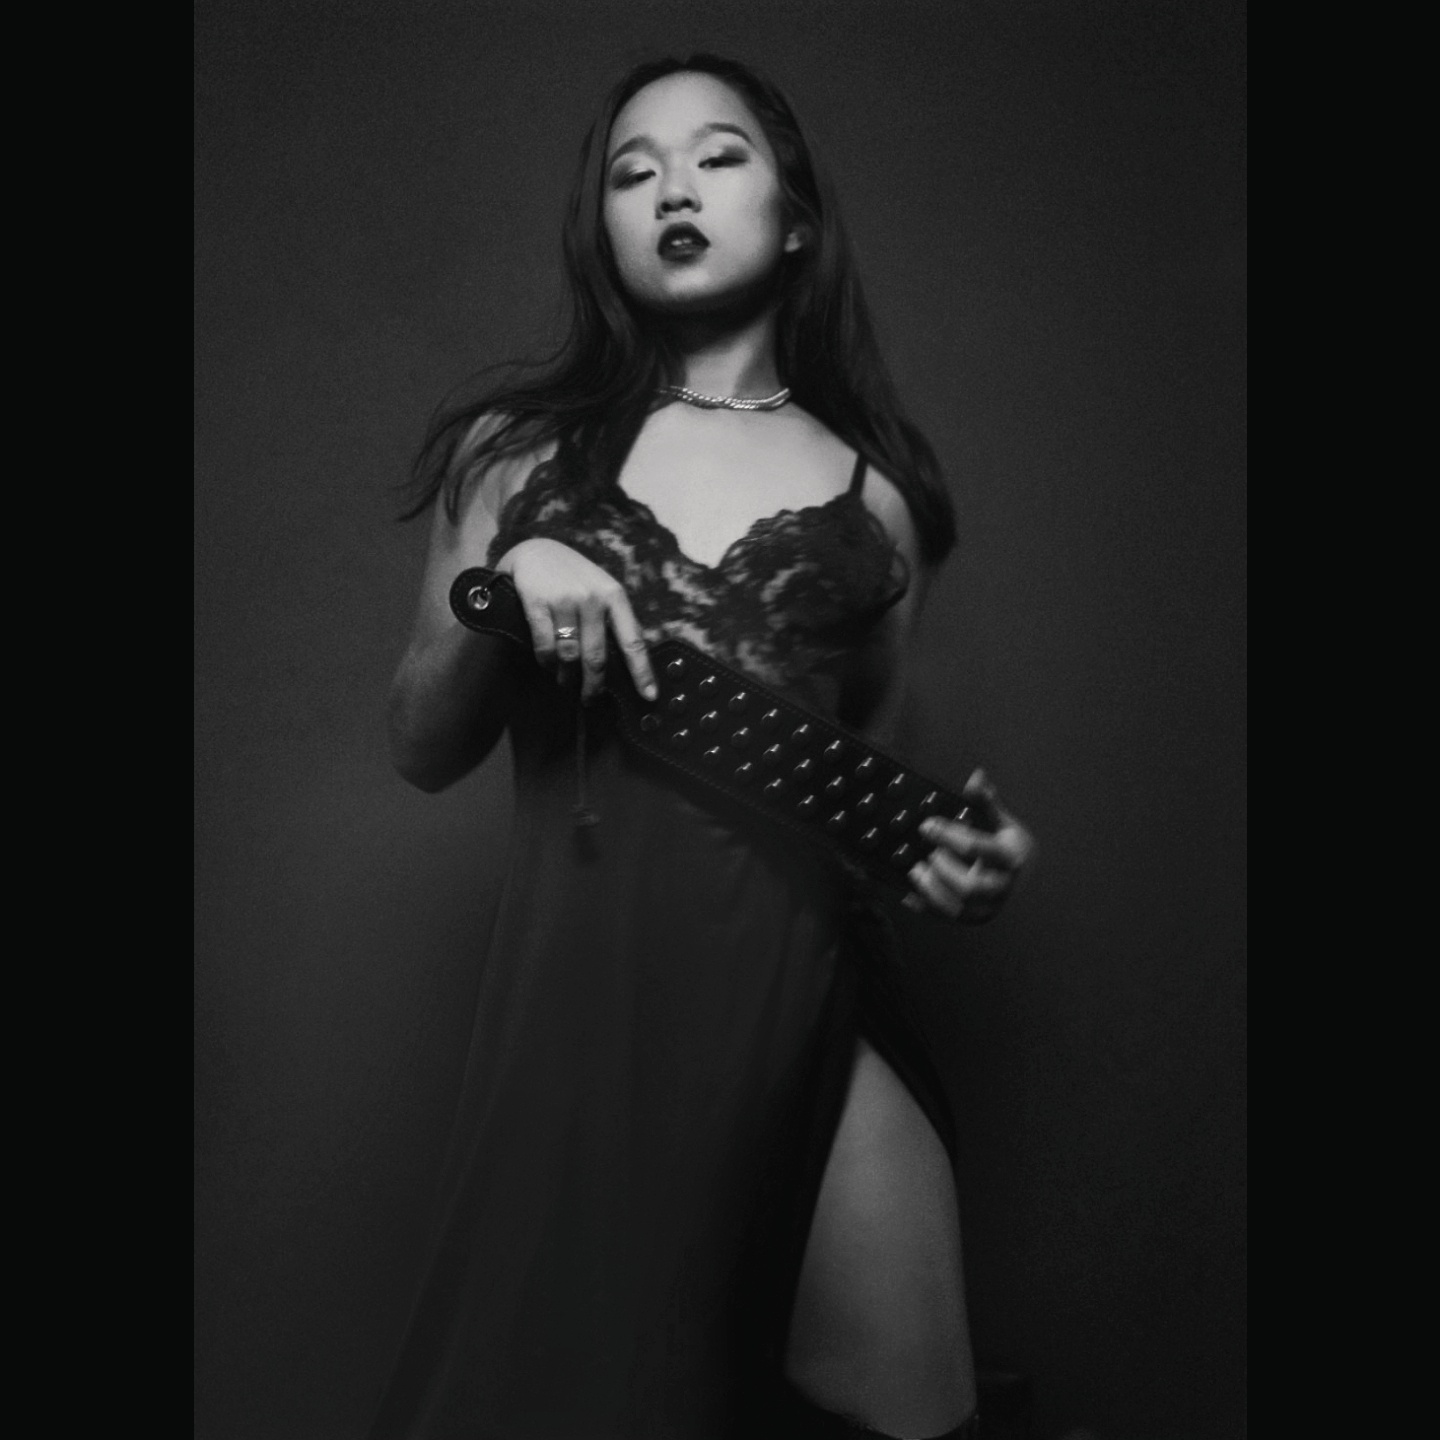 Enter the Dungeon of NYC pro domme Empress Wu